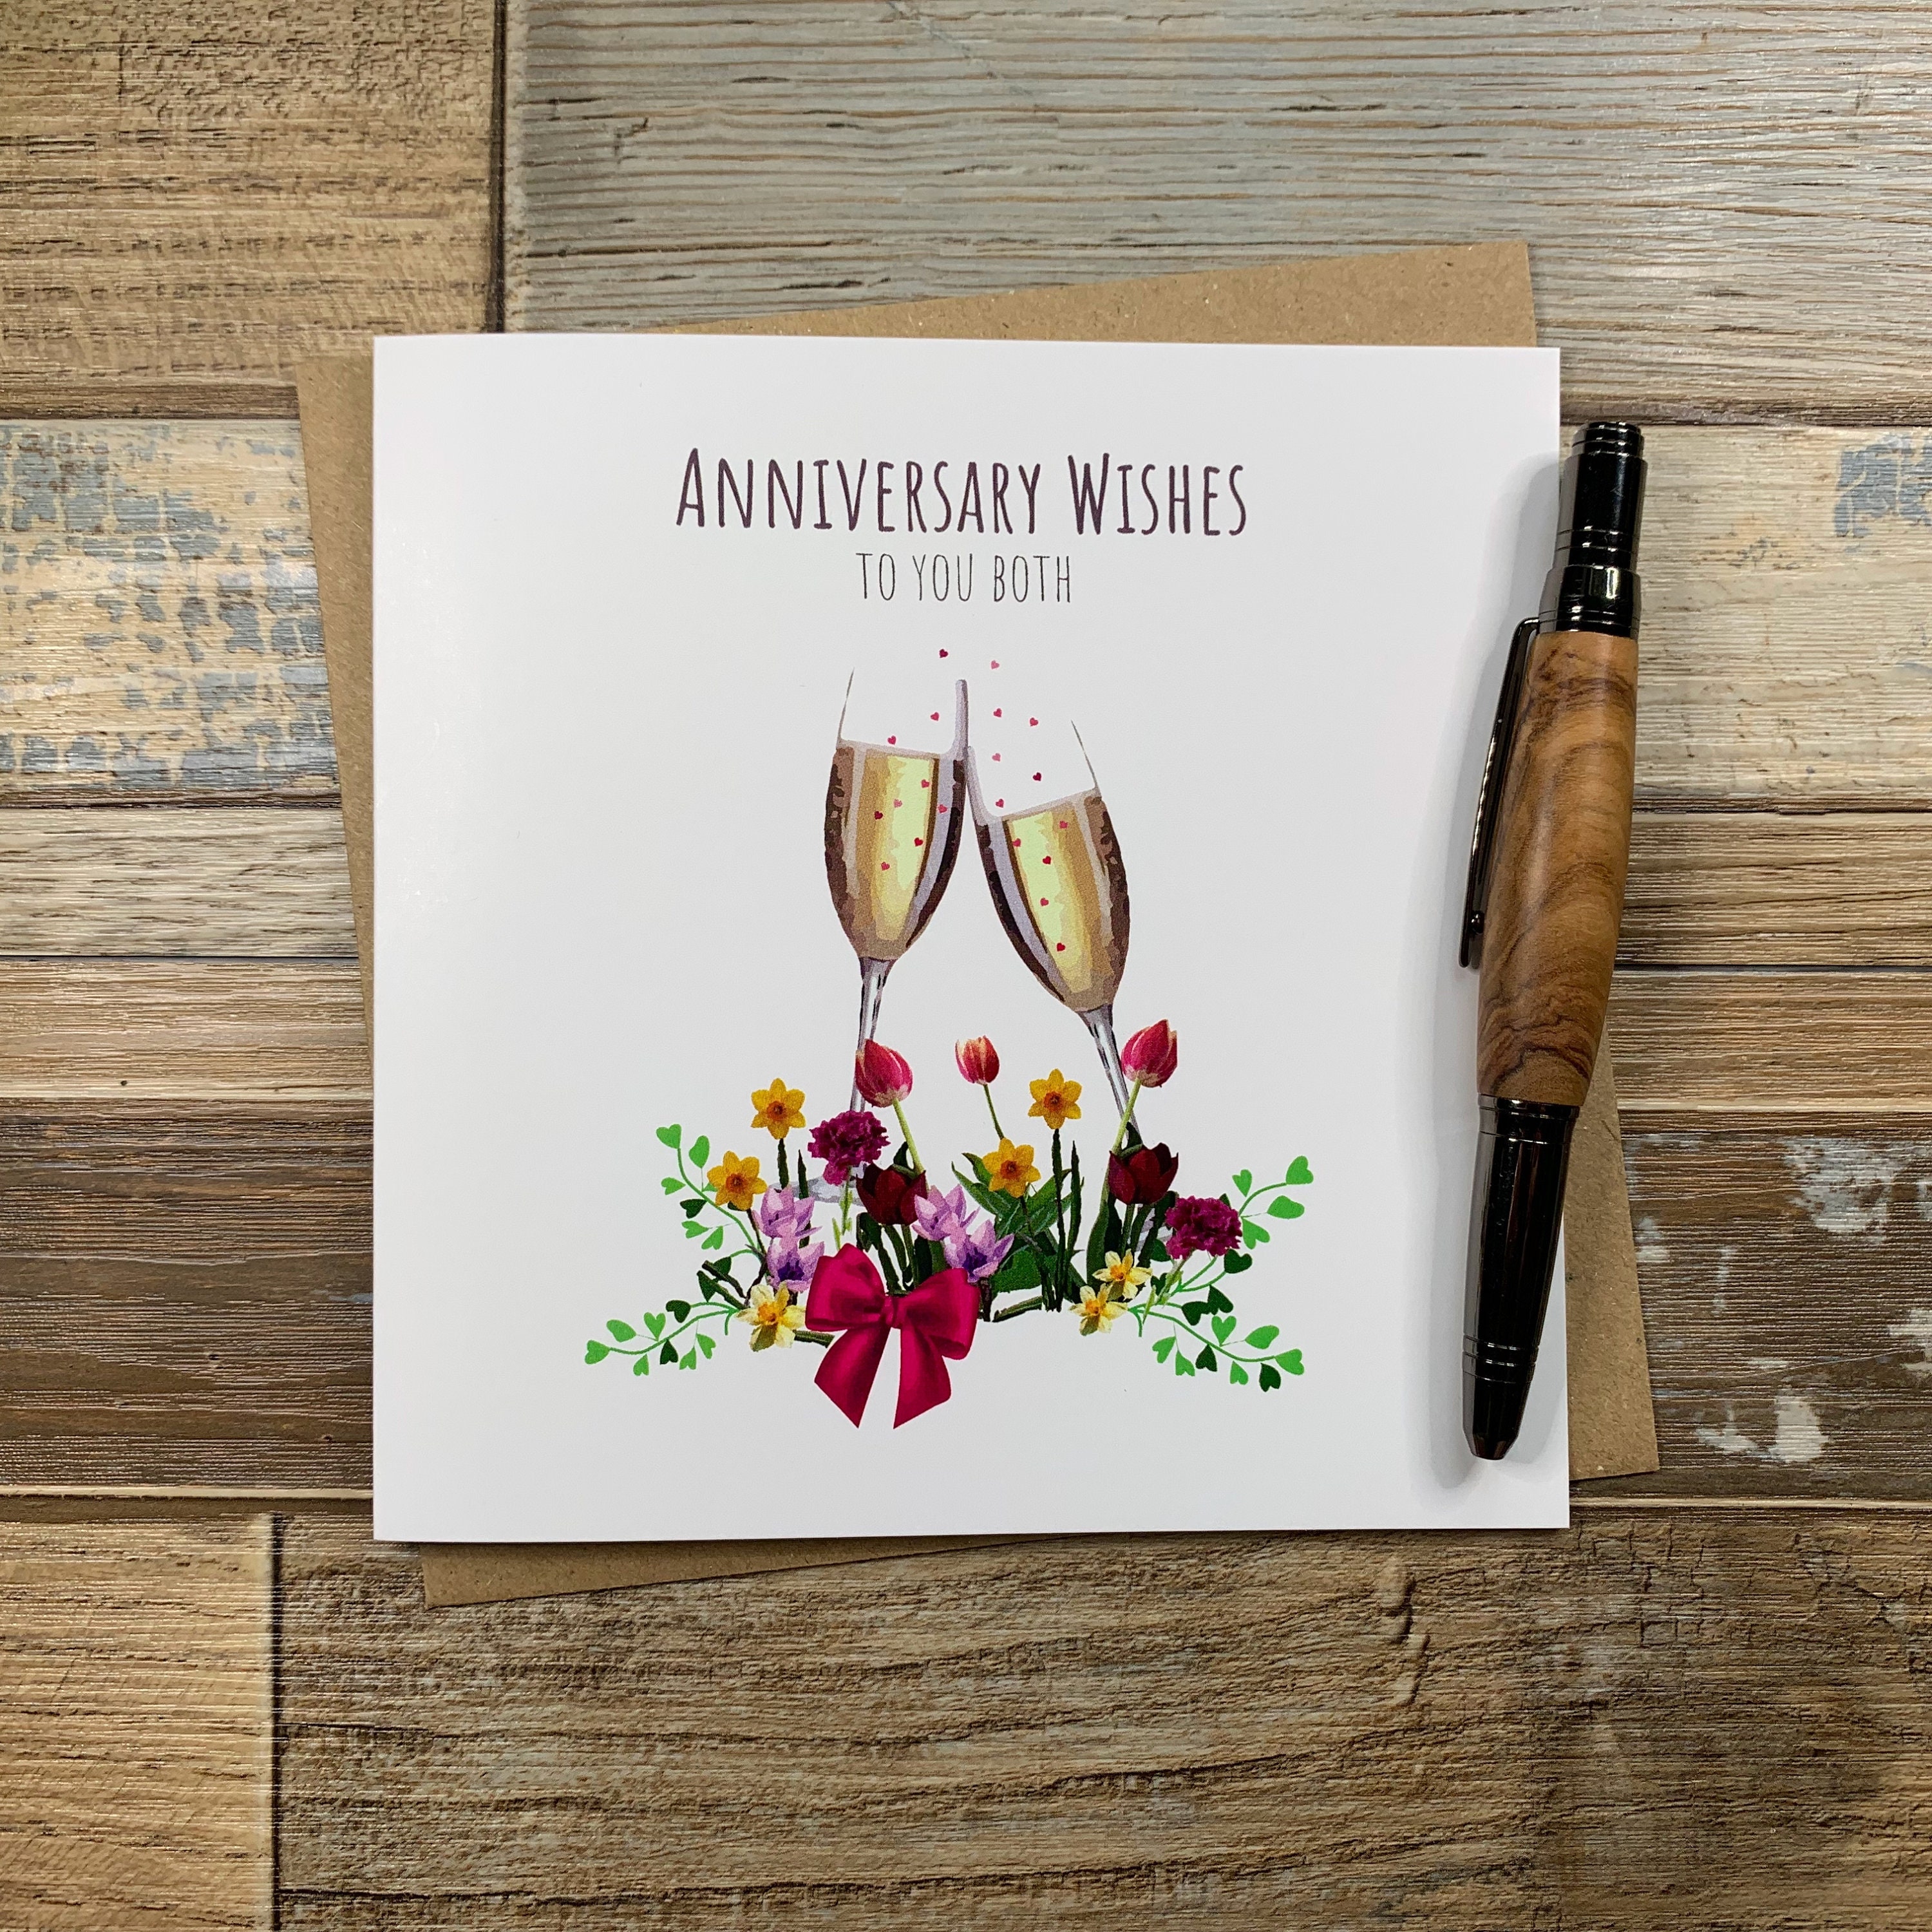 Personalized Anniversary Card With Couples Names Customized Happy